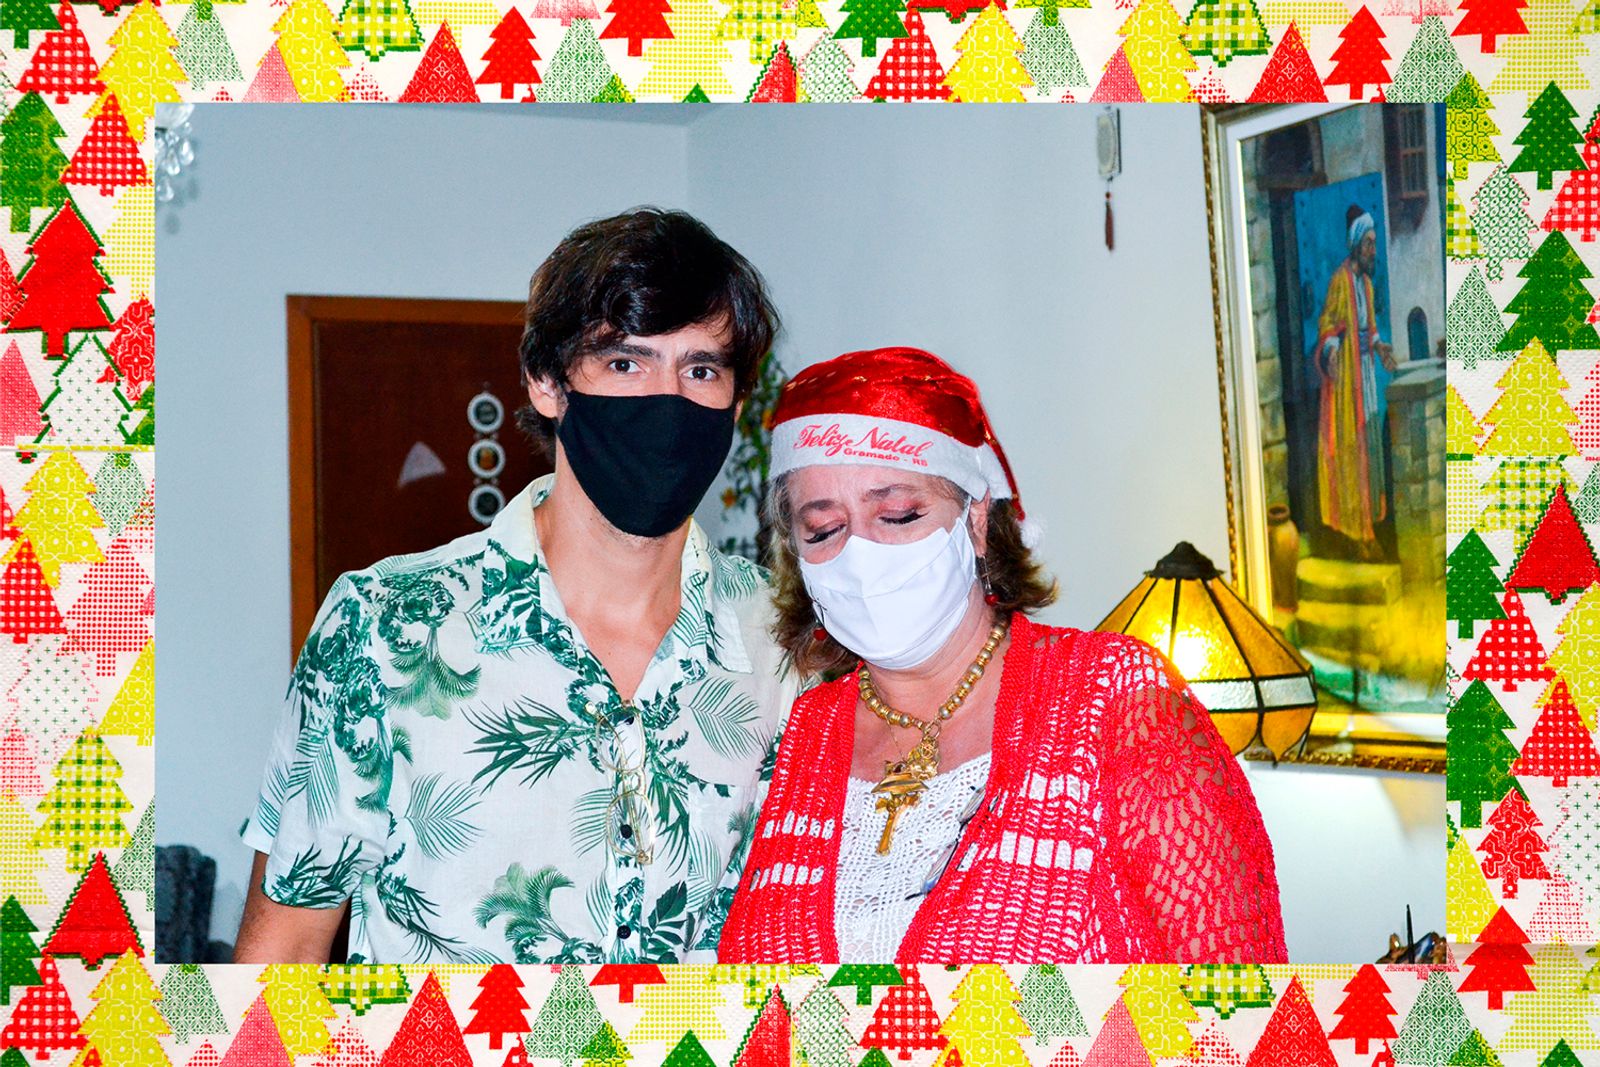 © Rafael Adorján - Image from the My Aunt's Christmas photography project